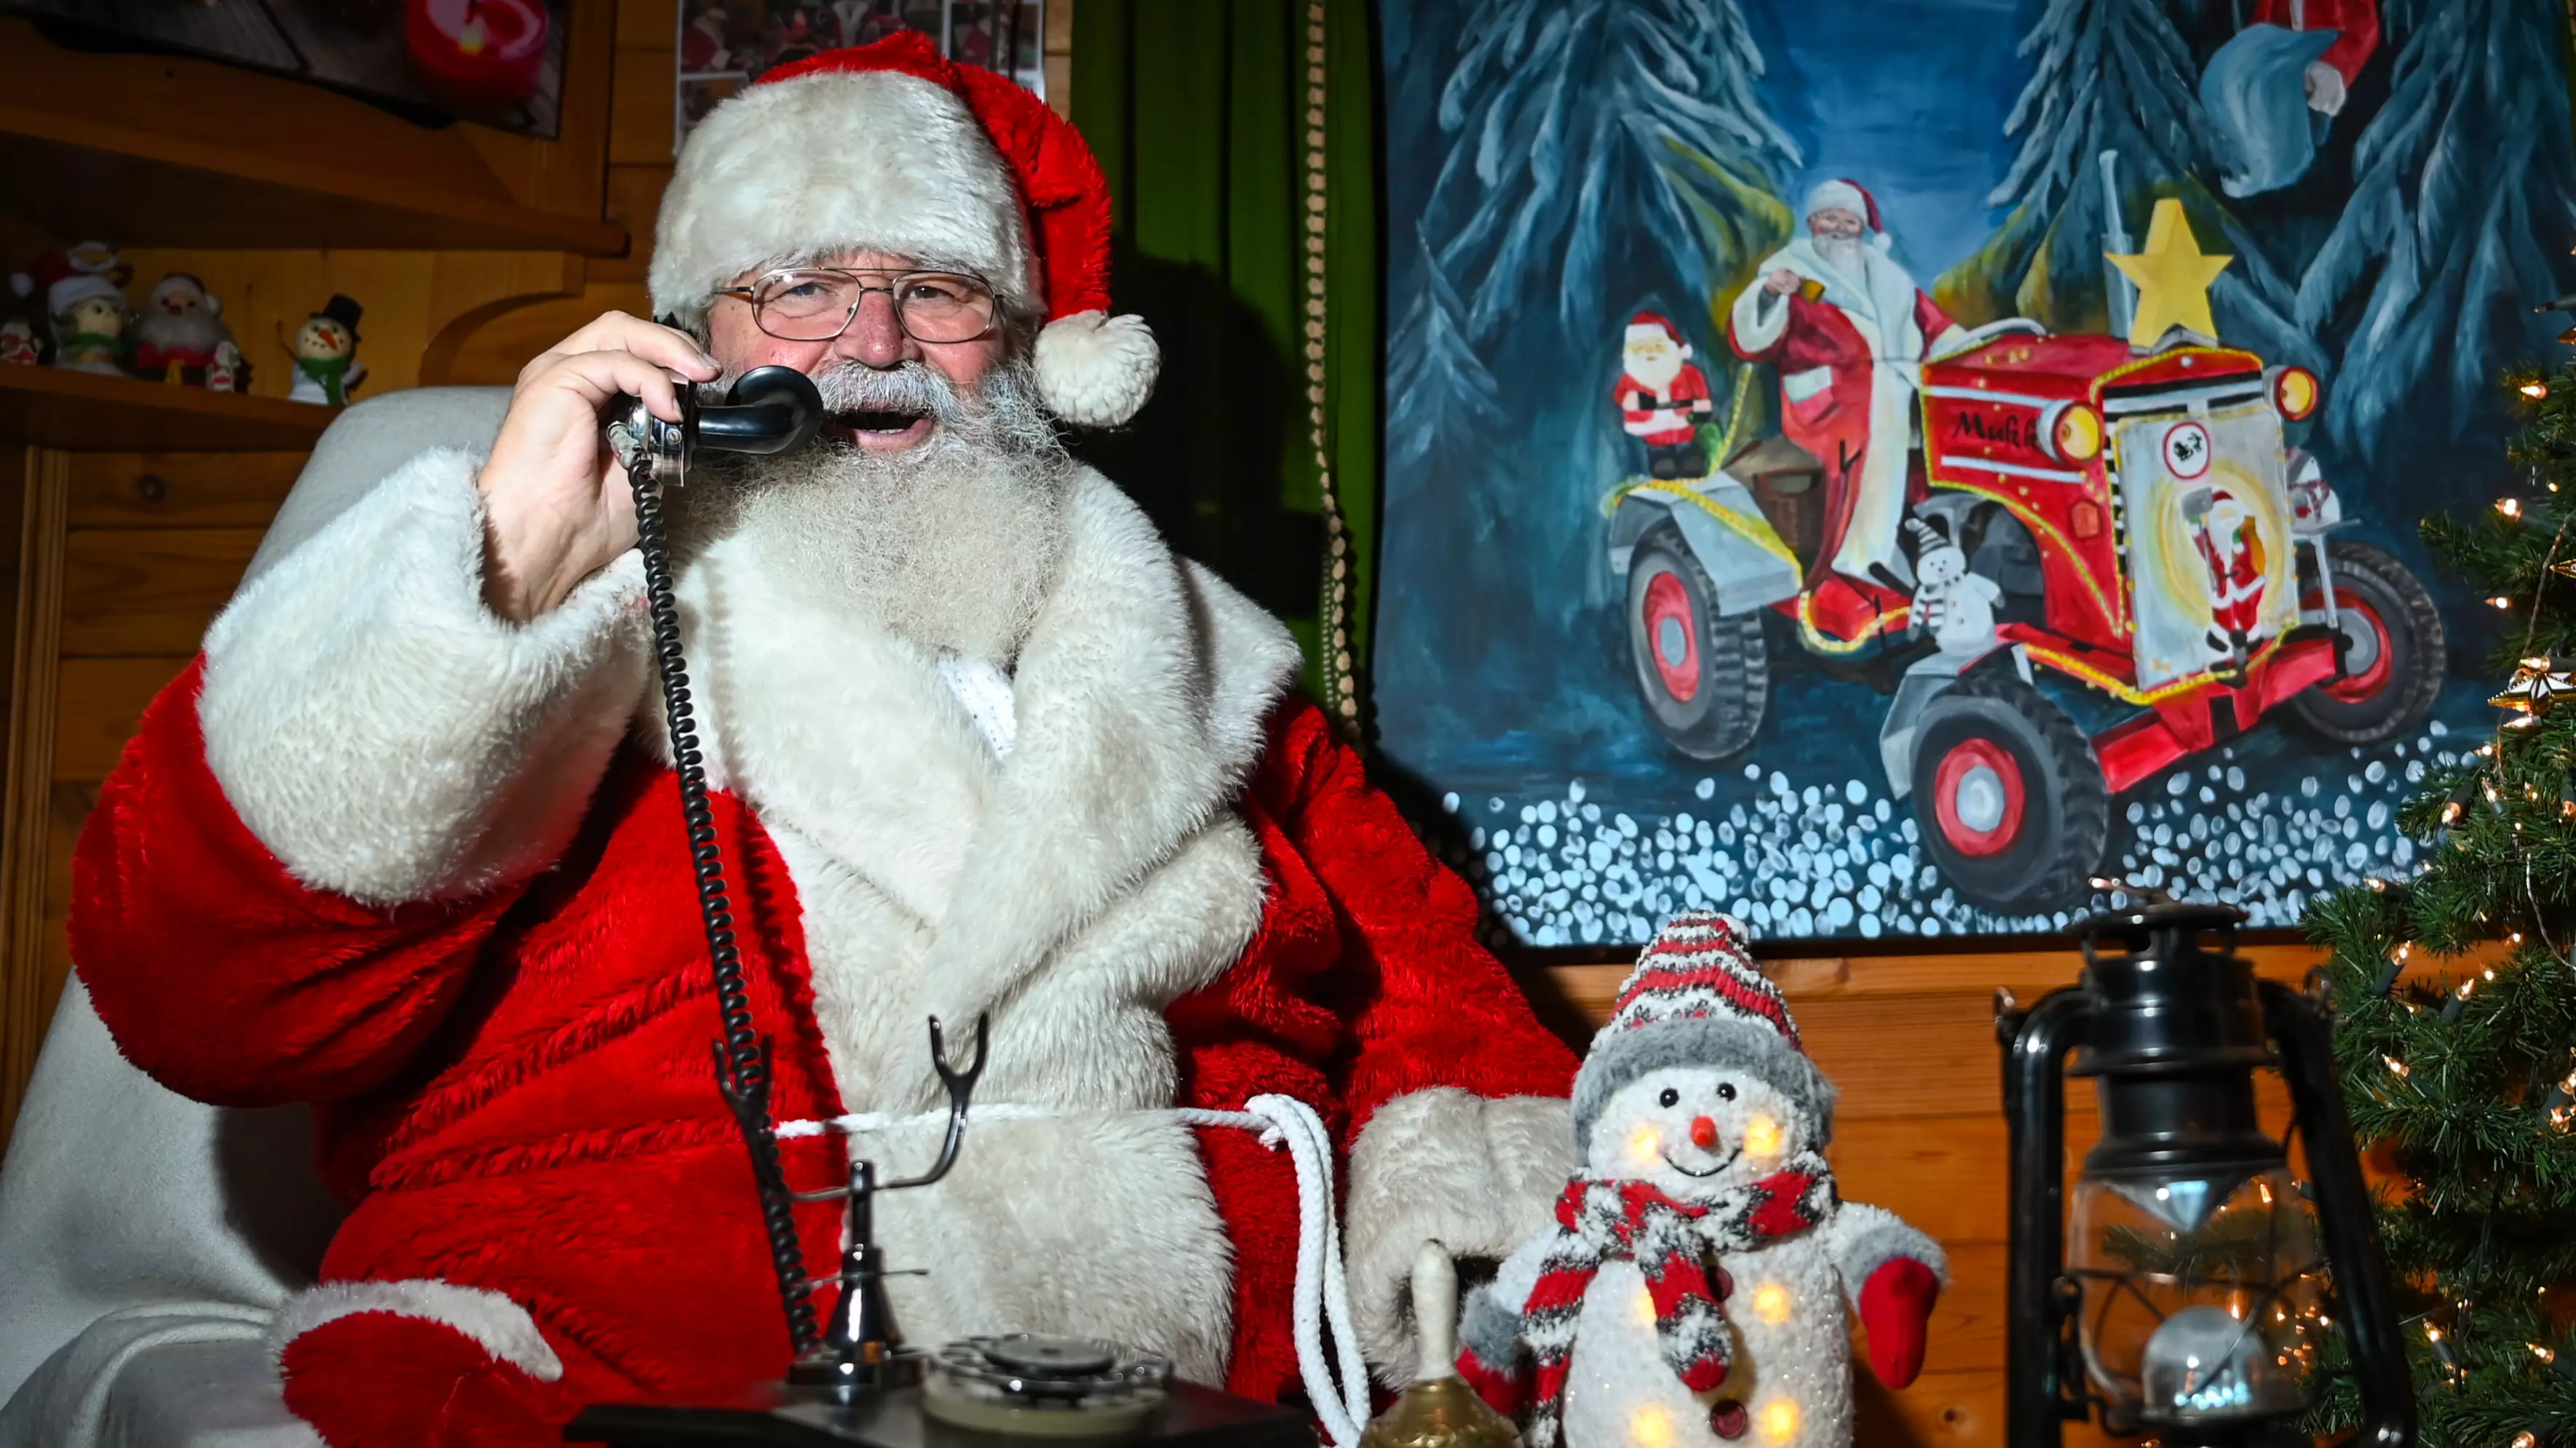 Lying To Your Kids About Santa Could Cause Serious Damage Says Child Psychologist